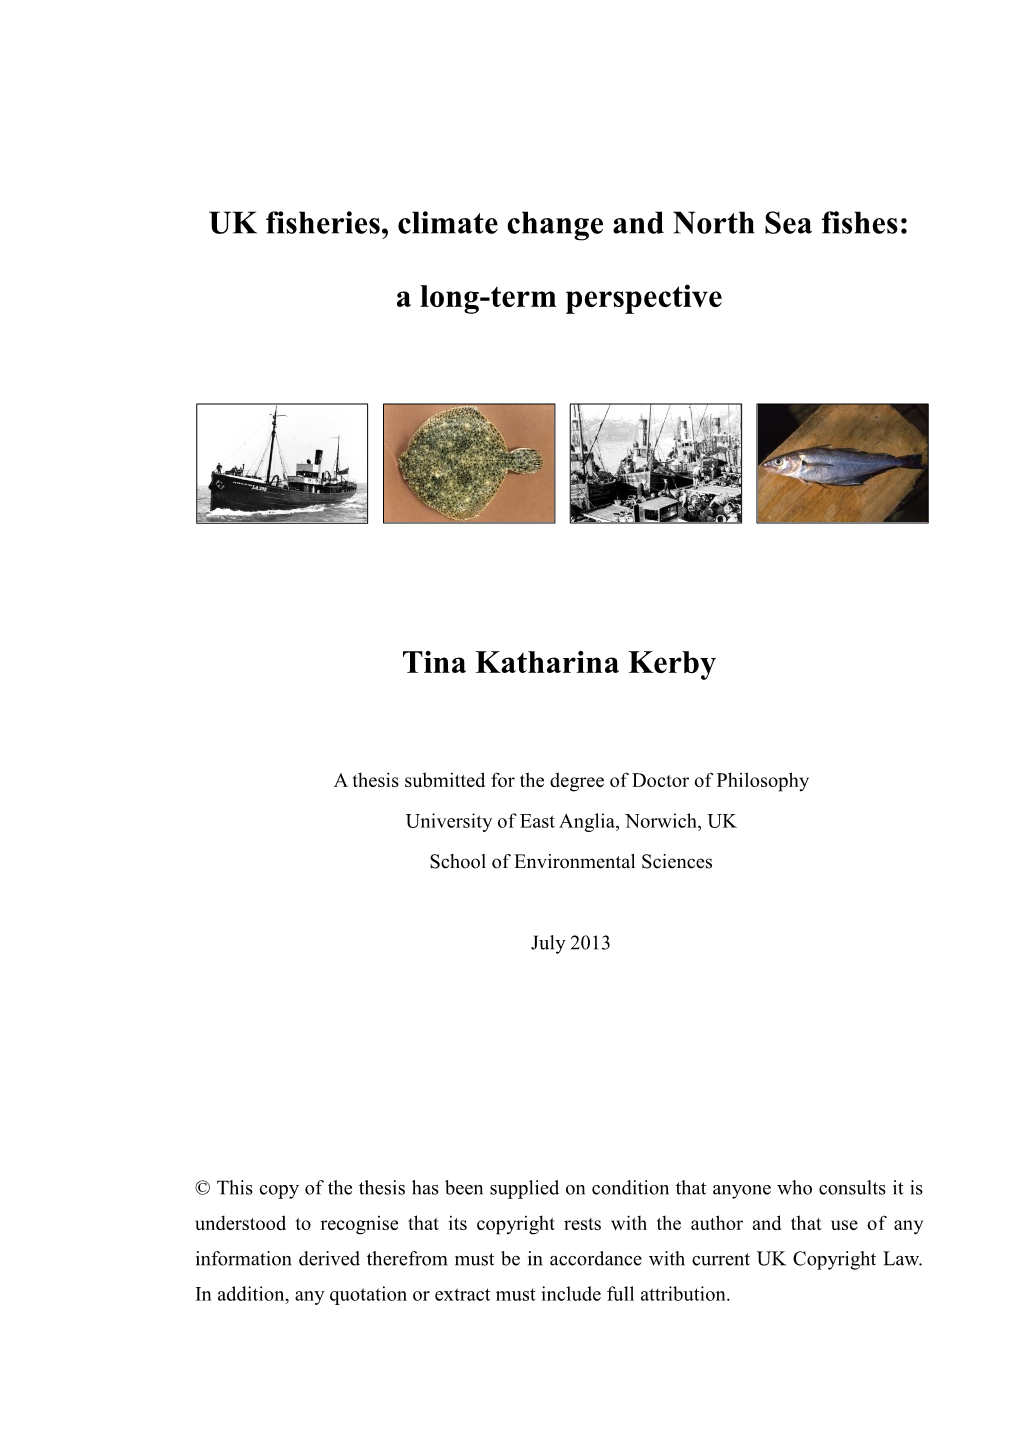 UK Fisheries, Climate Change and North Sea Fishes: a Long-Term Perspective Tina Katharina Kerby